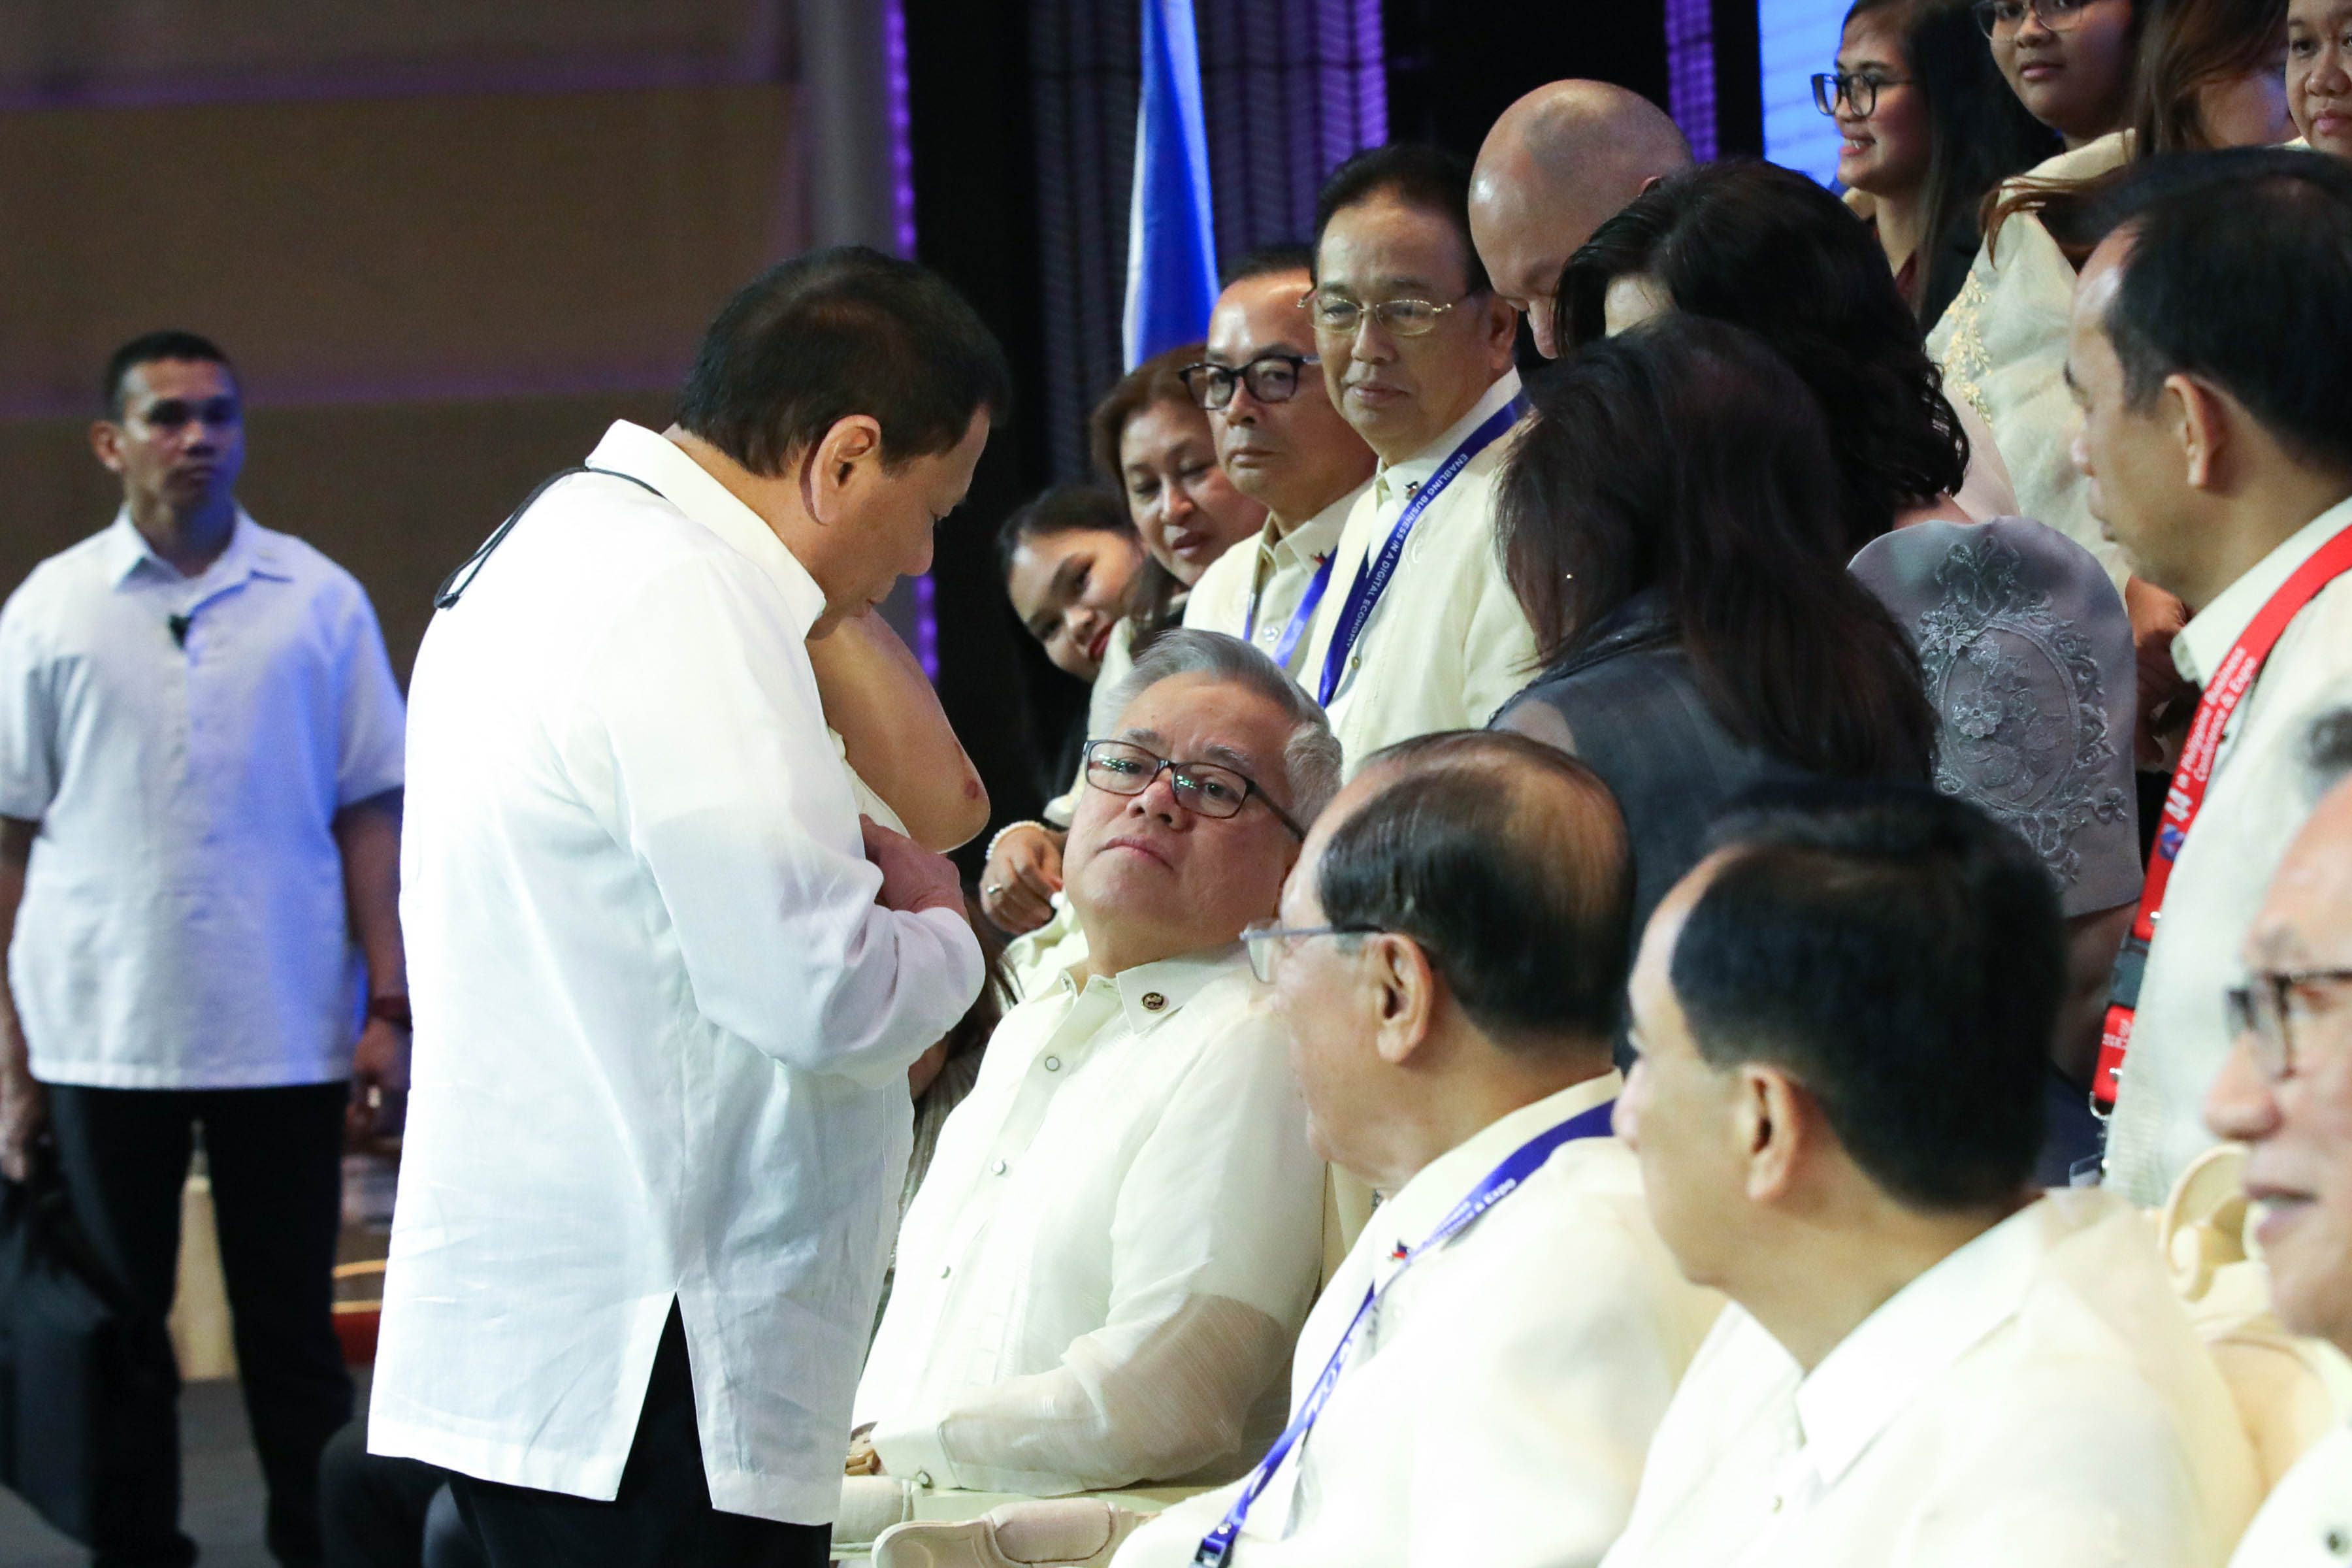 MISHAP. President Duterte shows more people his wound. Malacañang photo 